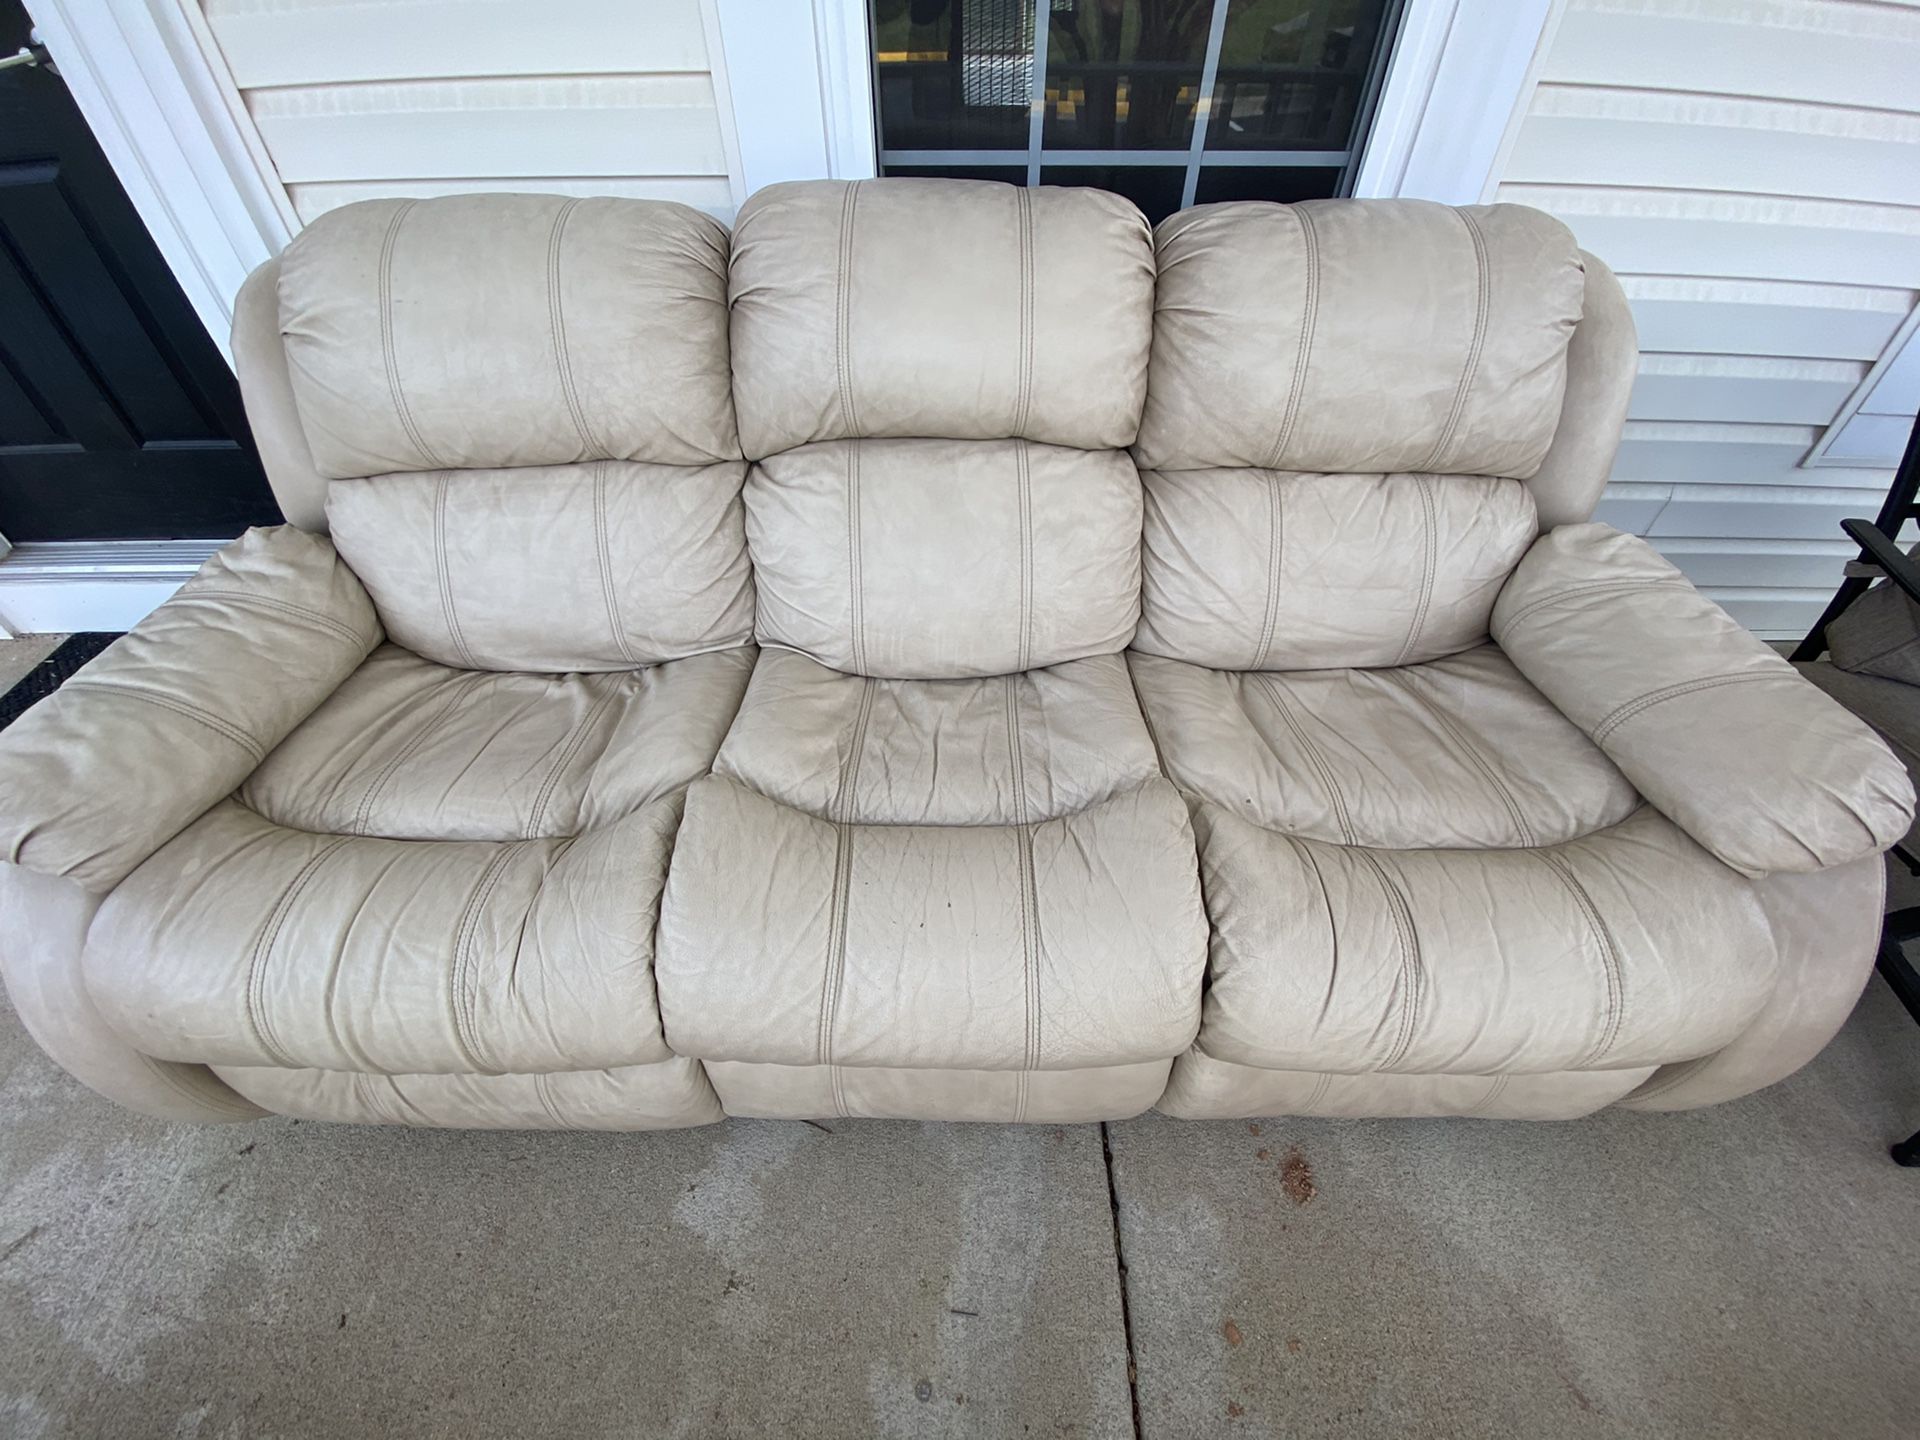 Recliner couch for sale